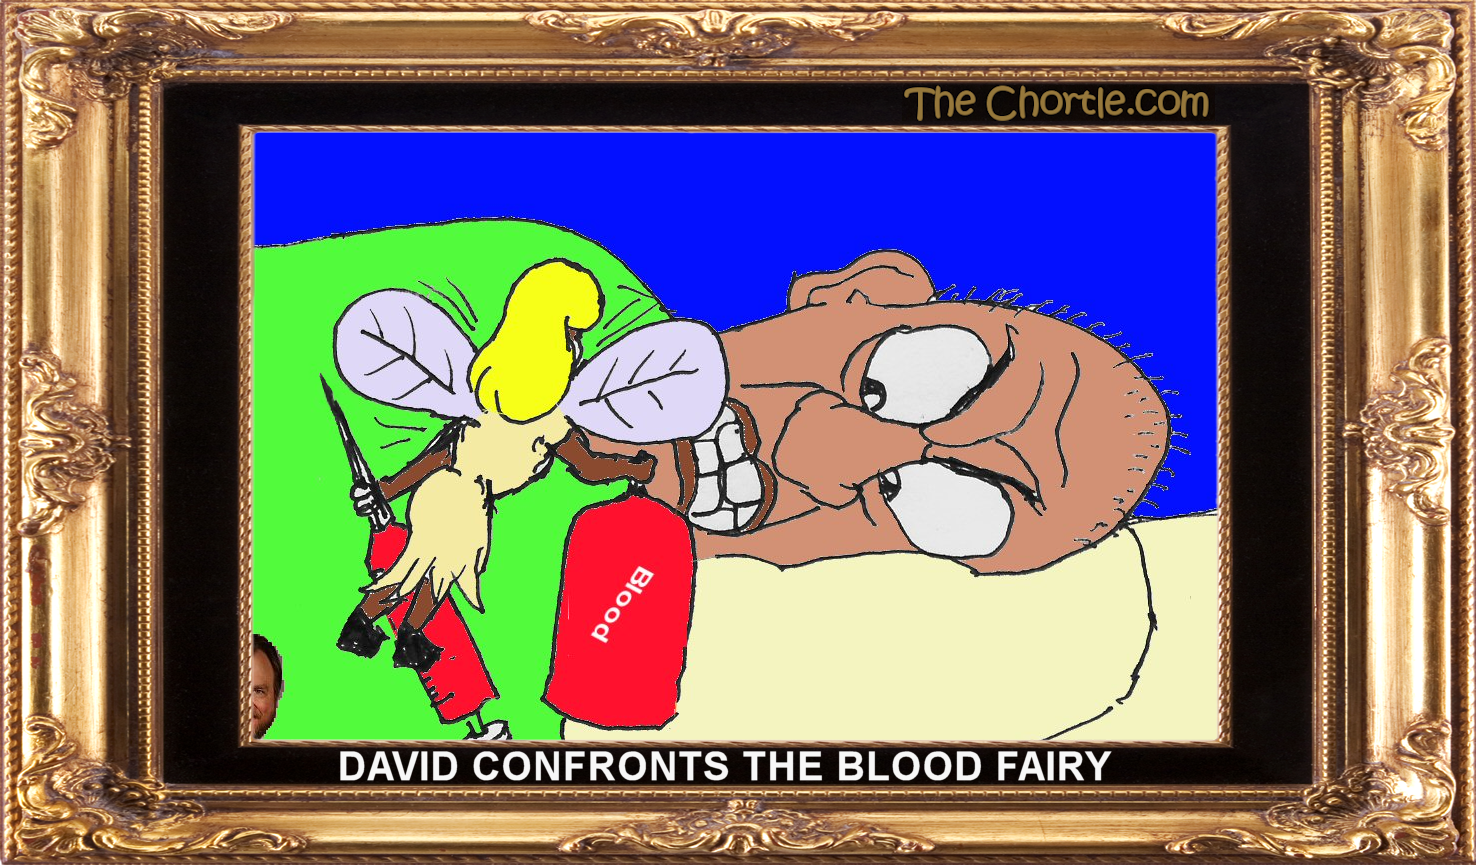 David confronts the blood fairy